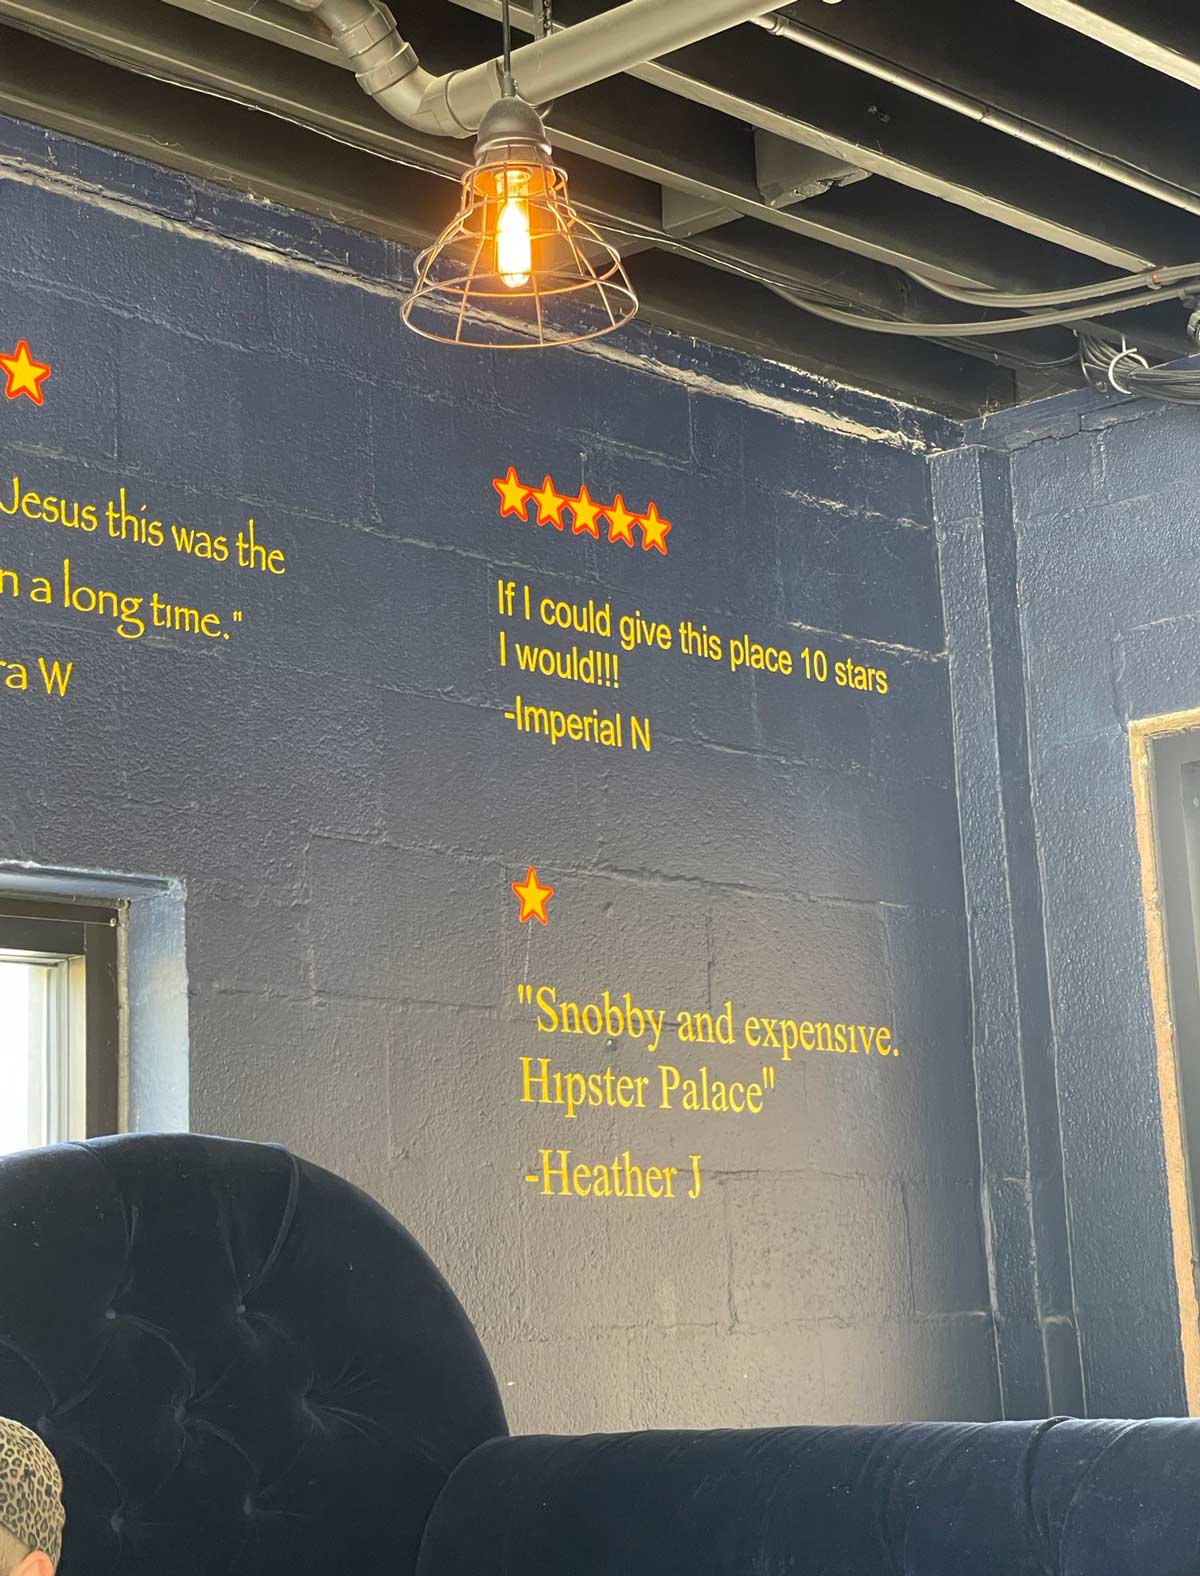 Cool stuff, restaurant my friend went to had several reviews painted on the wall. The bottom one was best